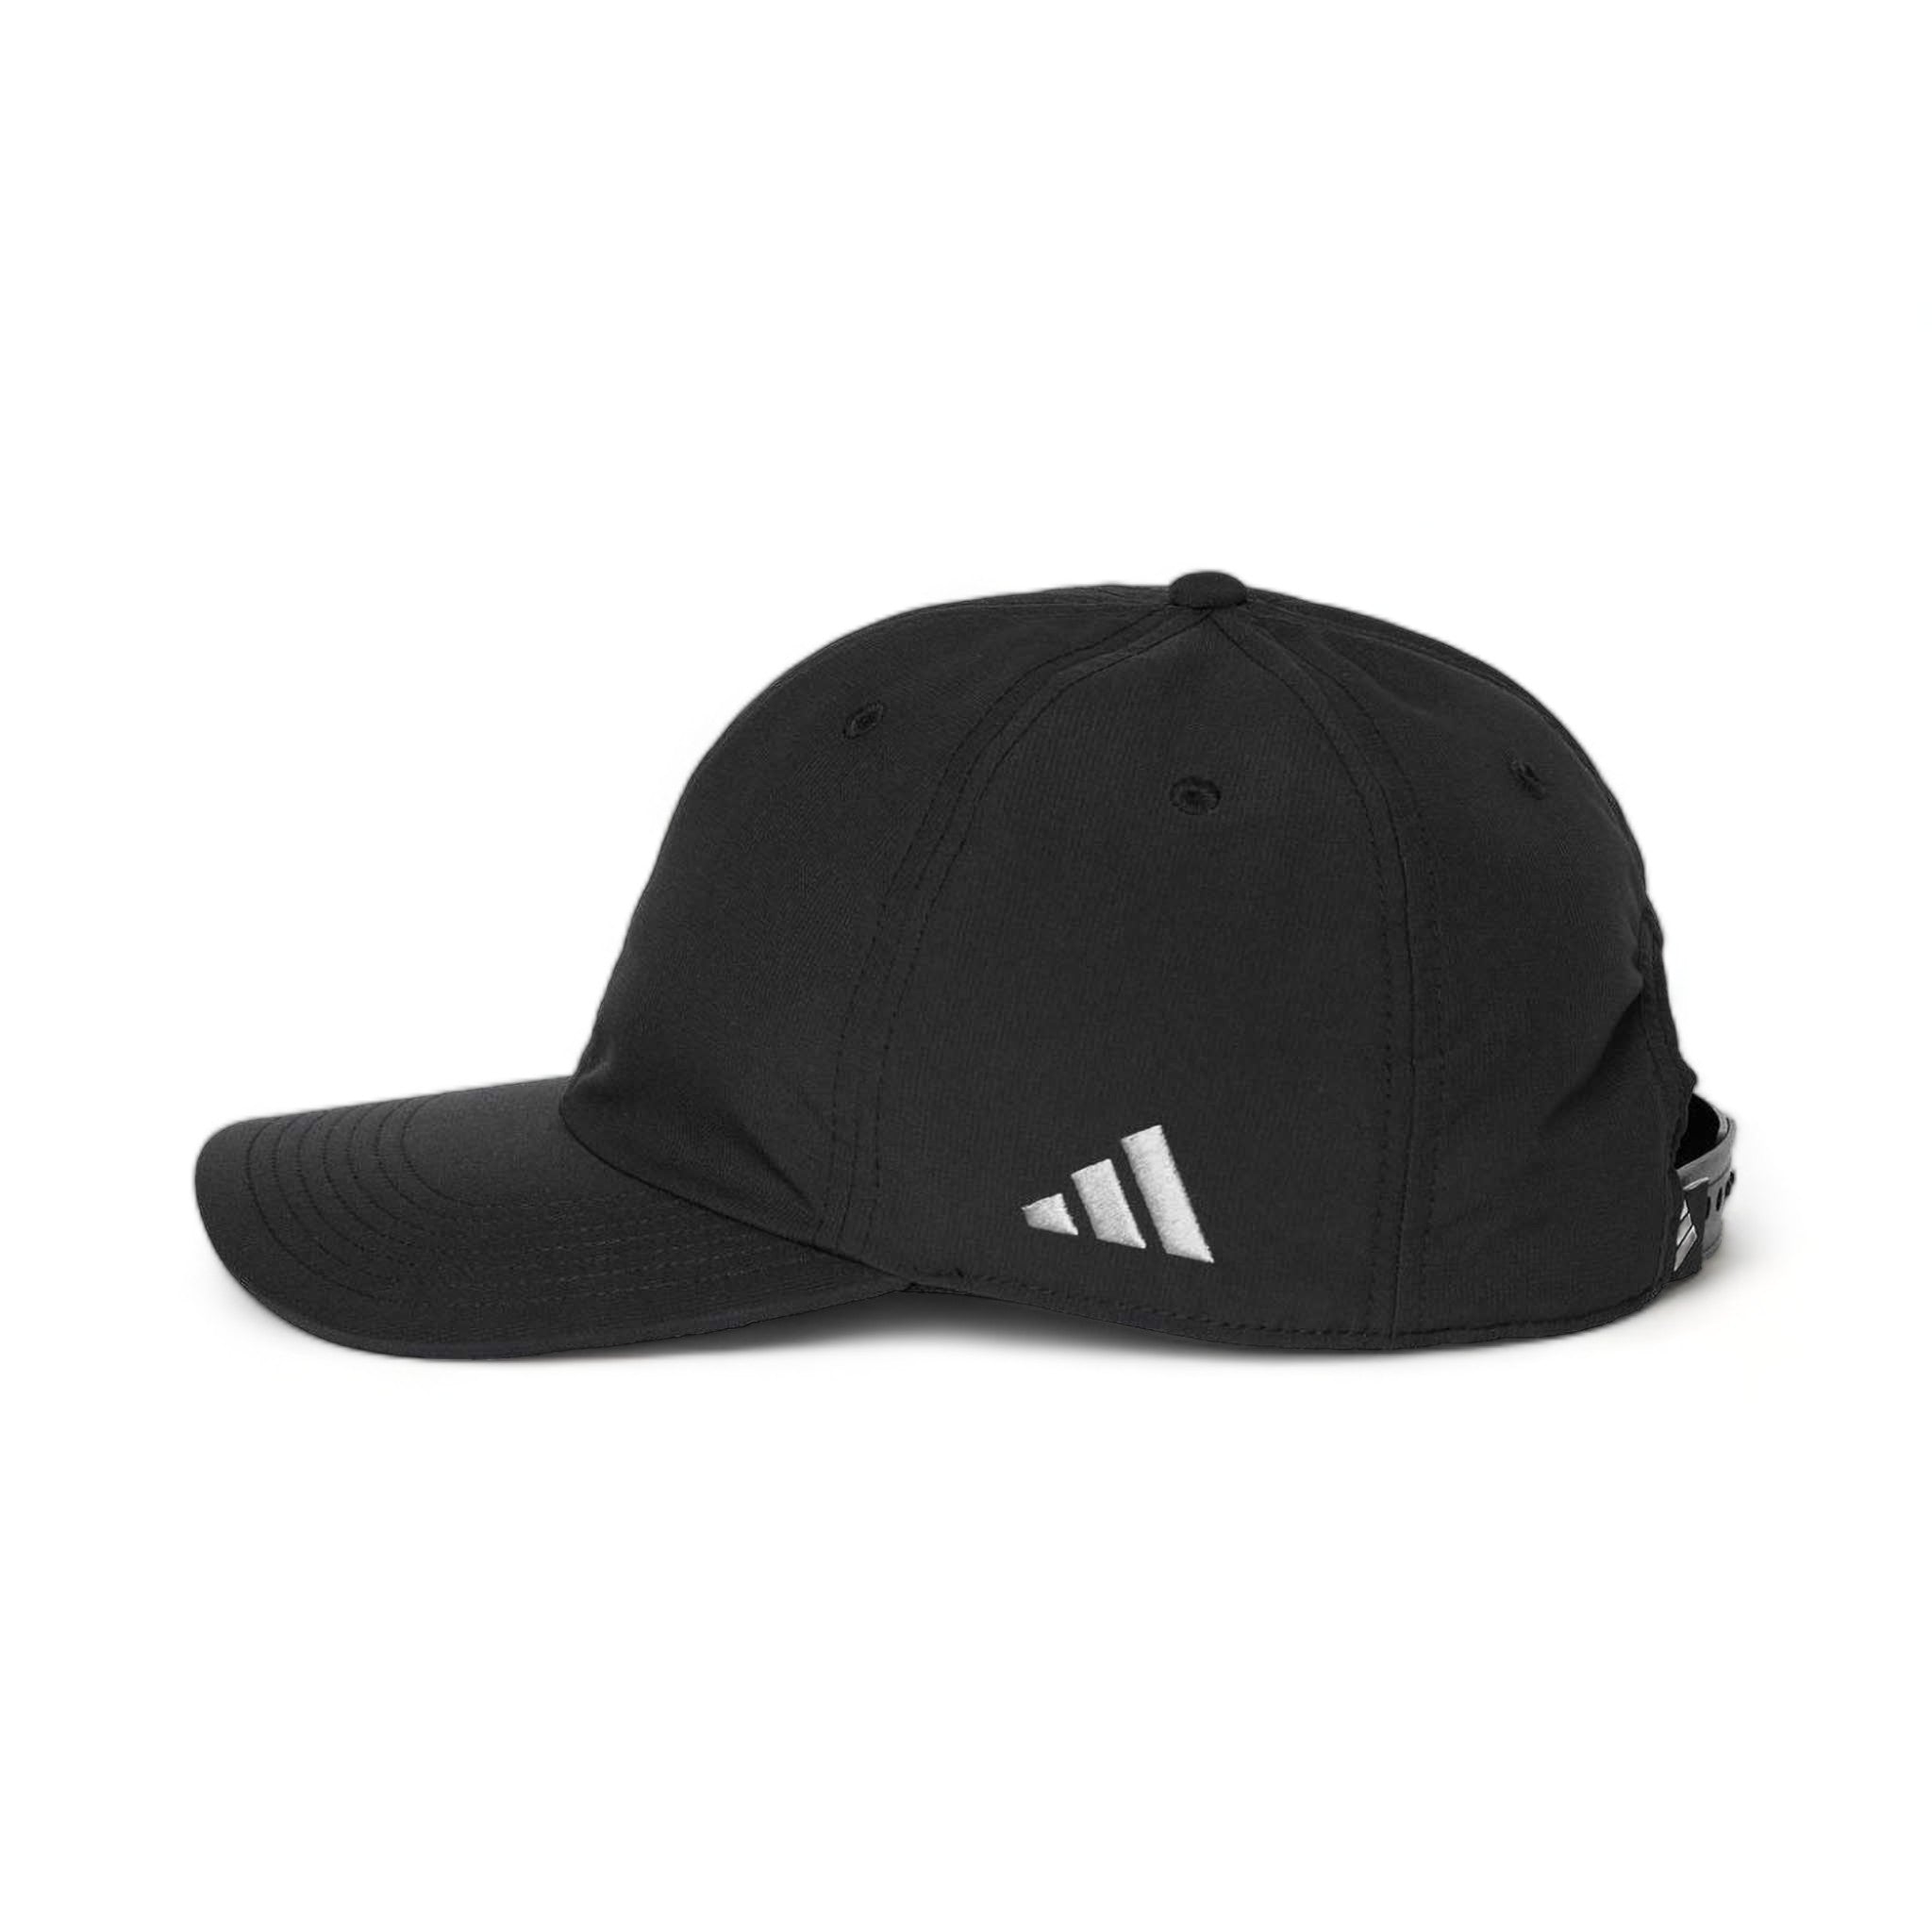 Side view of Adidas A600S custom hat in black